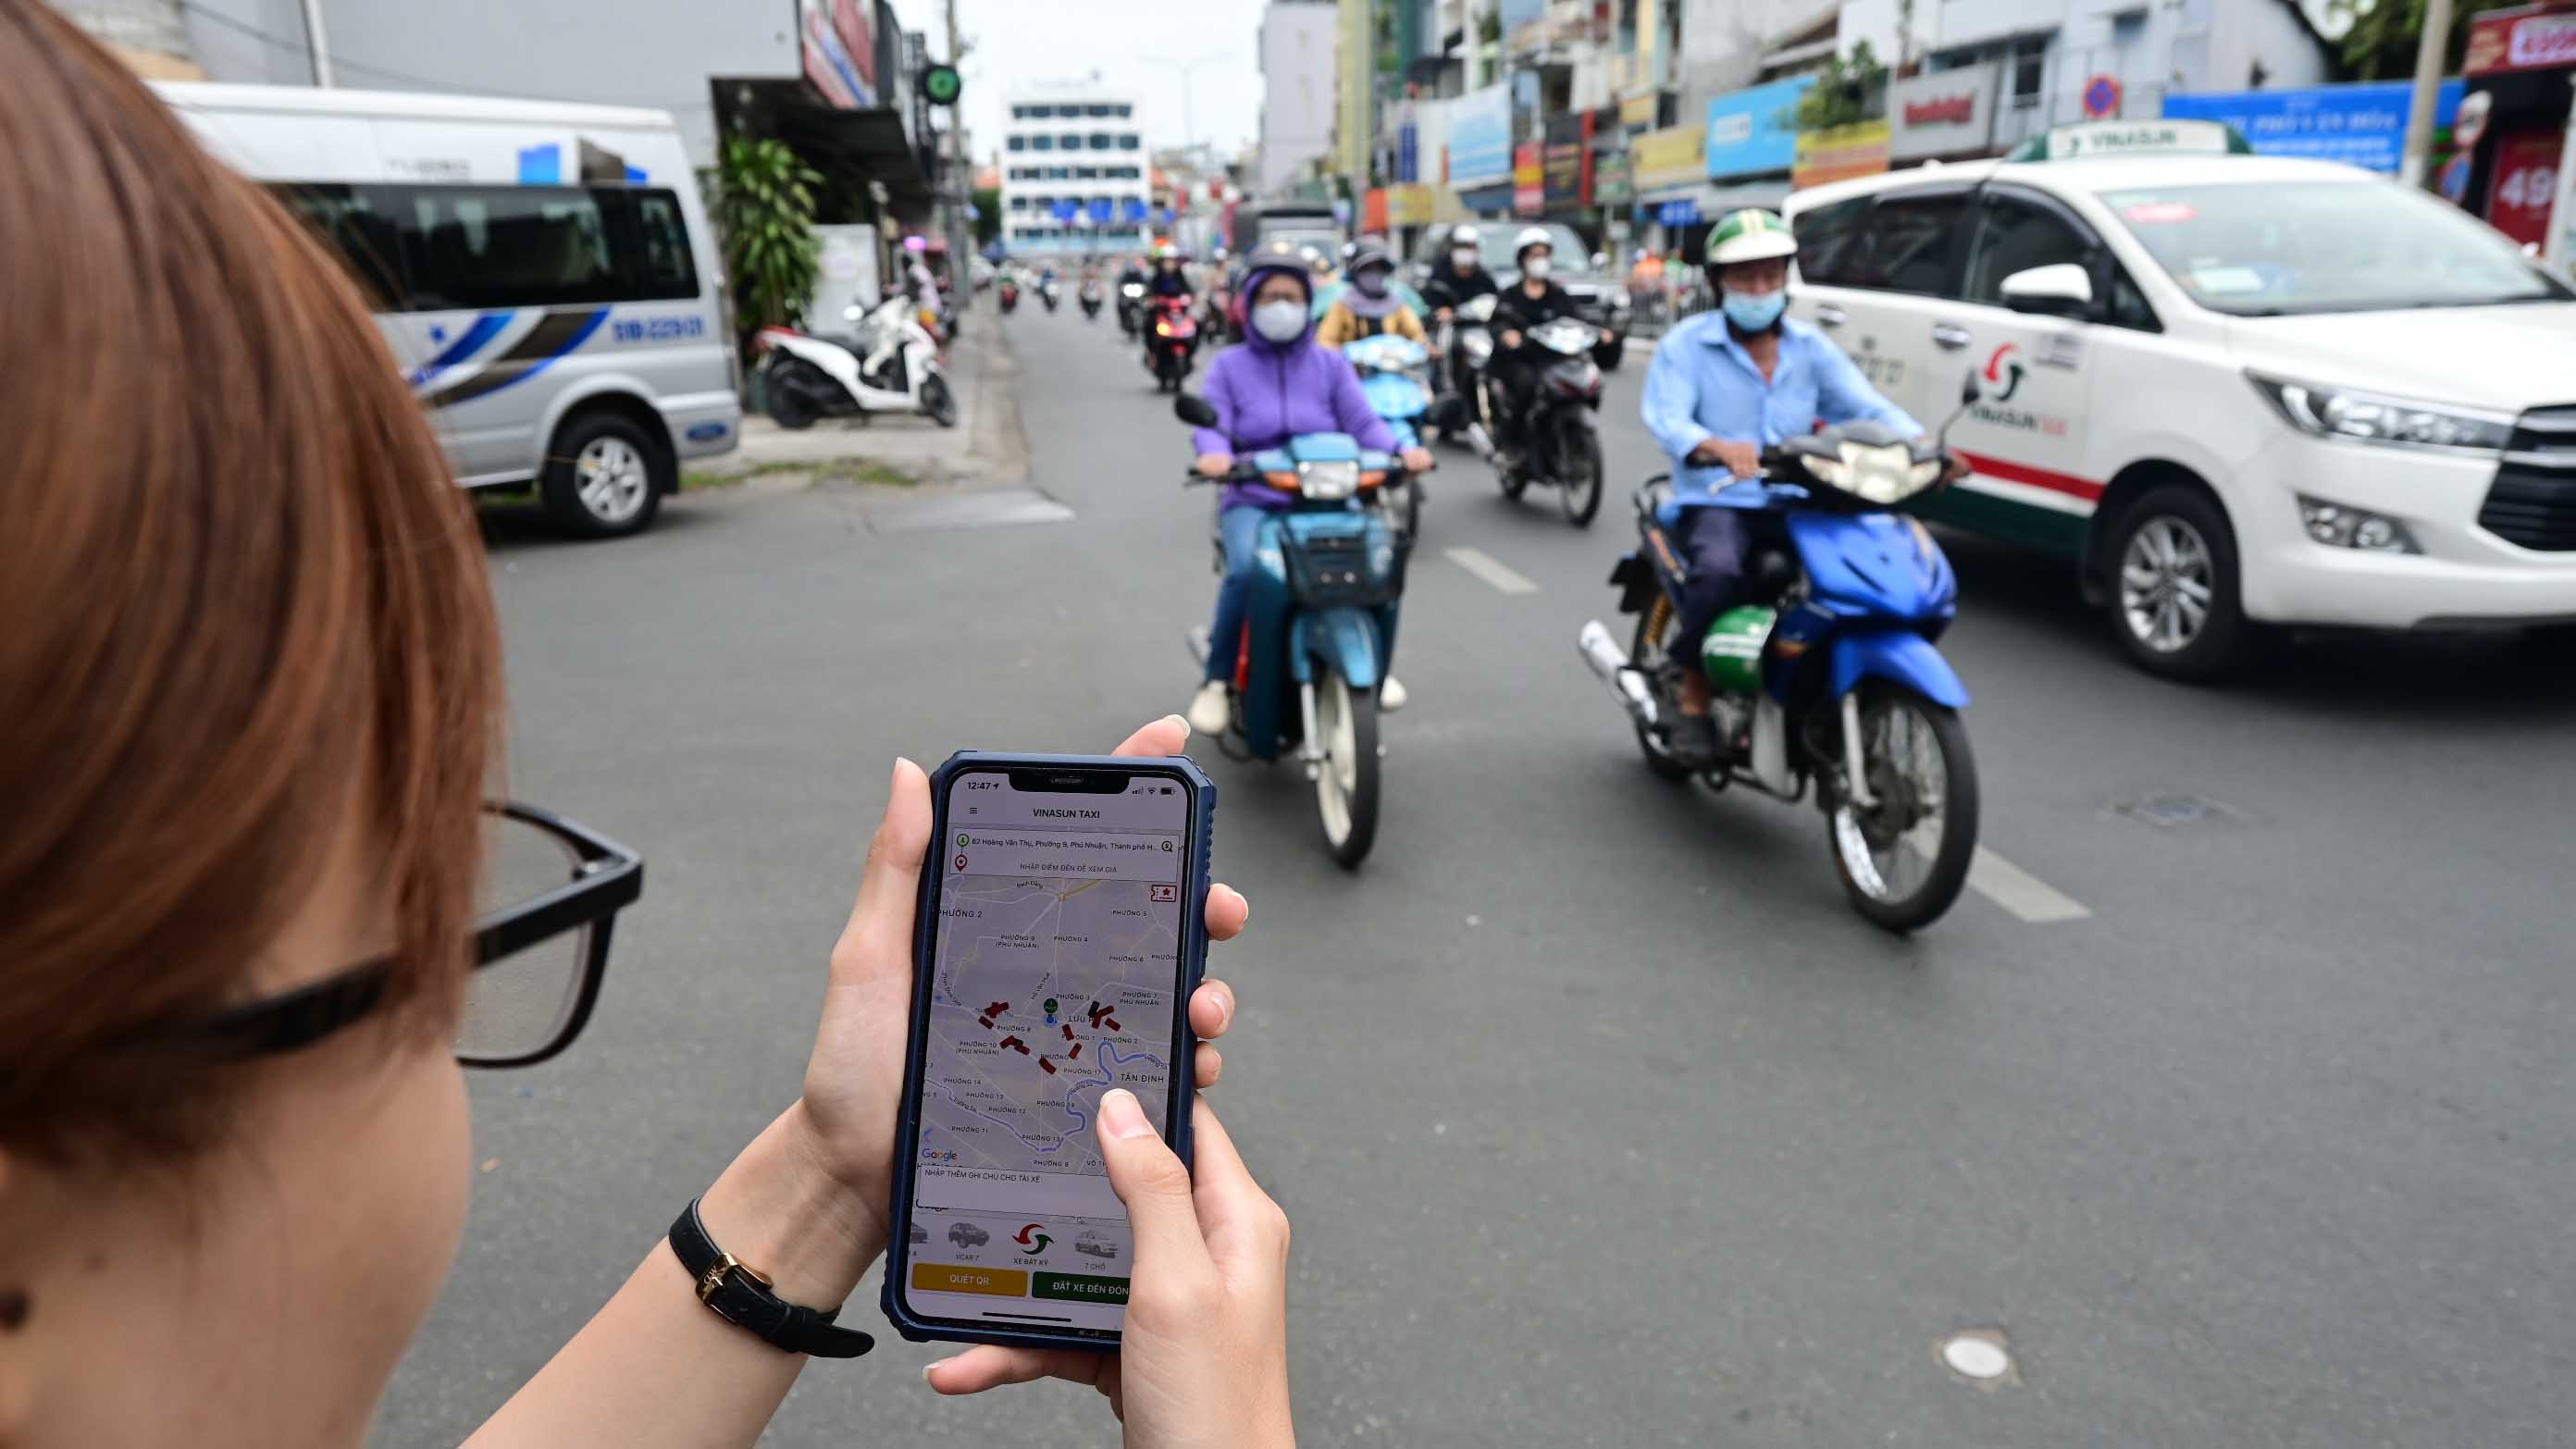 A resident booked a taxi through an app in Phu Nhuan District, Ho Chi Minh City on January 5, 2023. Photo: Quang Dinh / Tuoi Tre